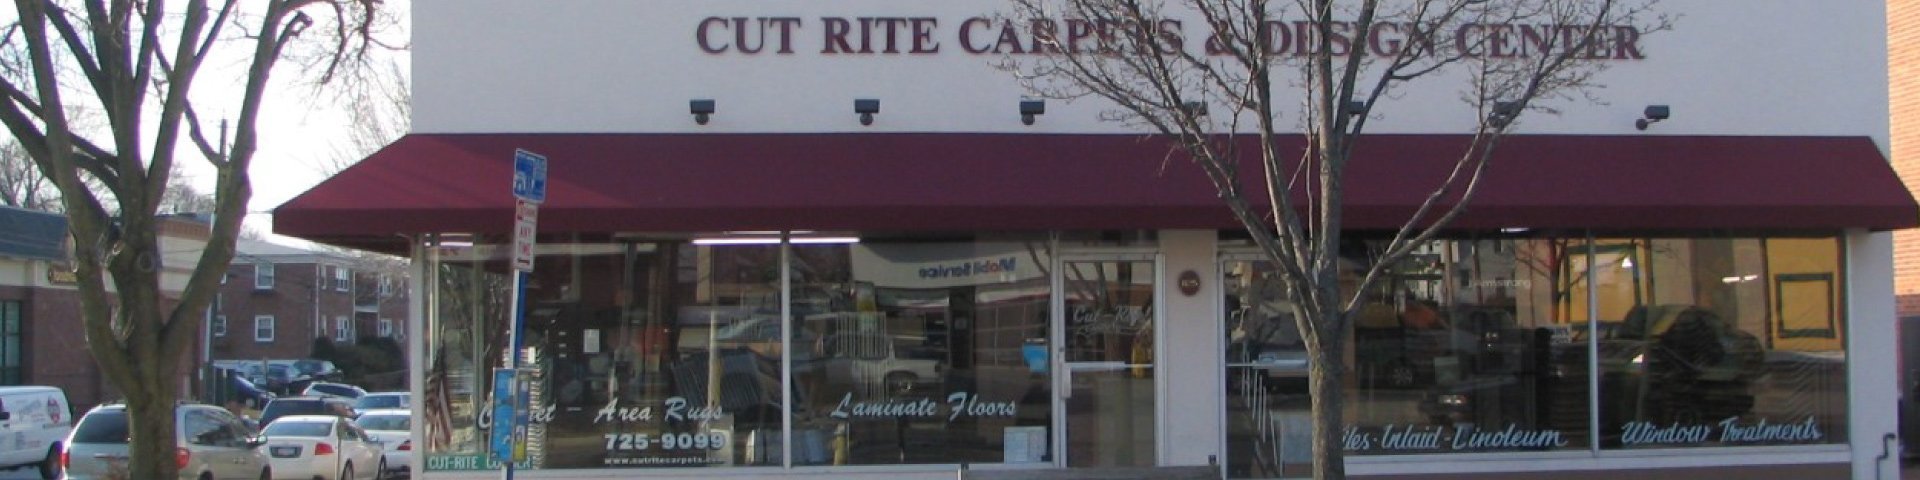 Cut-Rite Carpets & Design Center in Scarsdale. Serving these areas since 1979: Scarsdale, Eastchester, Hartsdale, Yonkers, White Plains, Harrison, Rye, Rye Brook, Port Chester, Pelham, Mount Vernon, Tuckahoe, Bornxville, Pelham Manor, Larchmont & more!